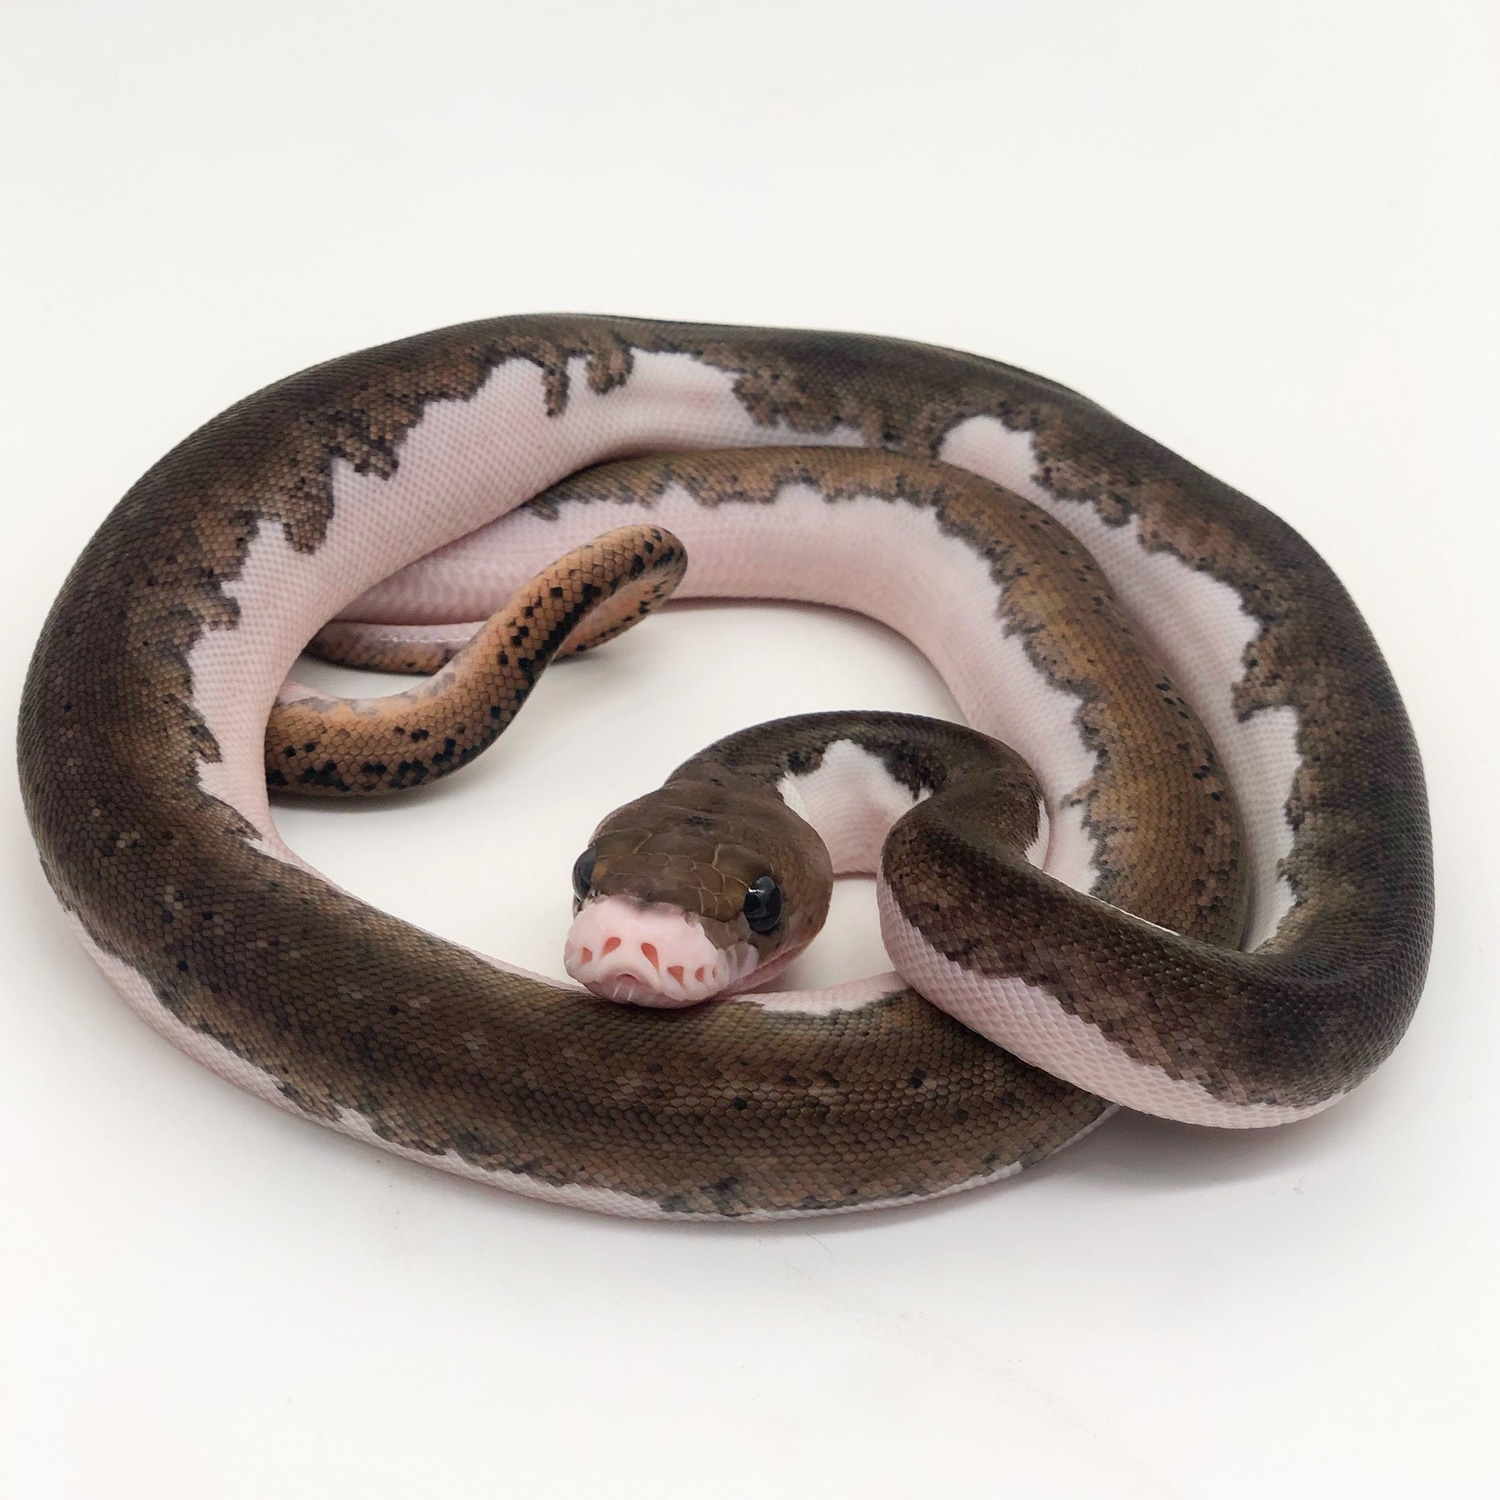 2020 Male Pied Reticulated Python by J&M Reptiles